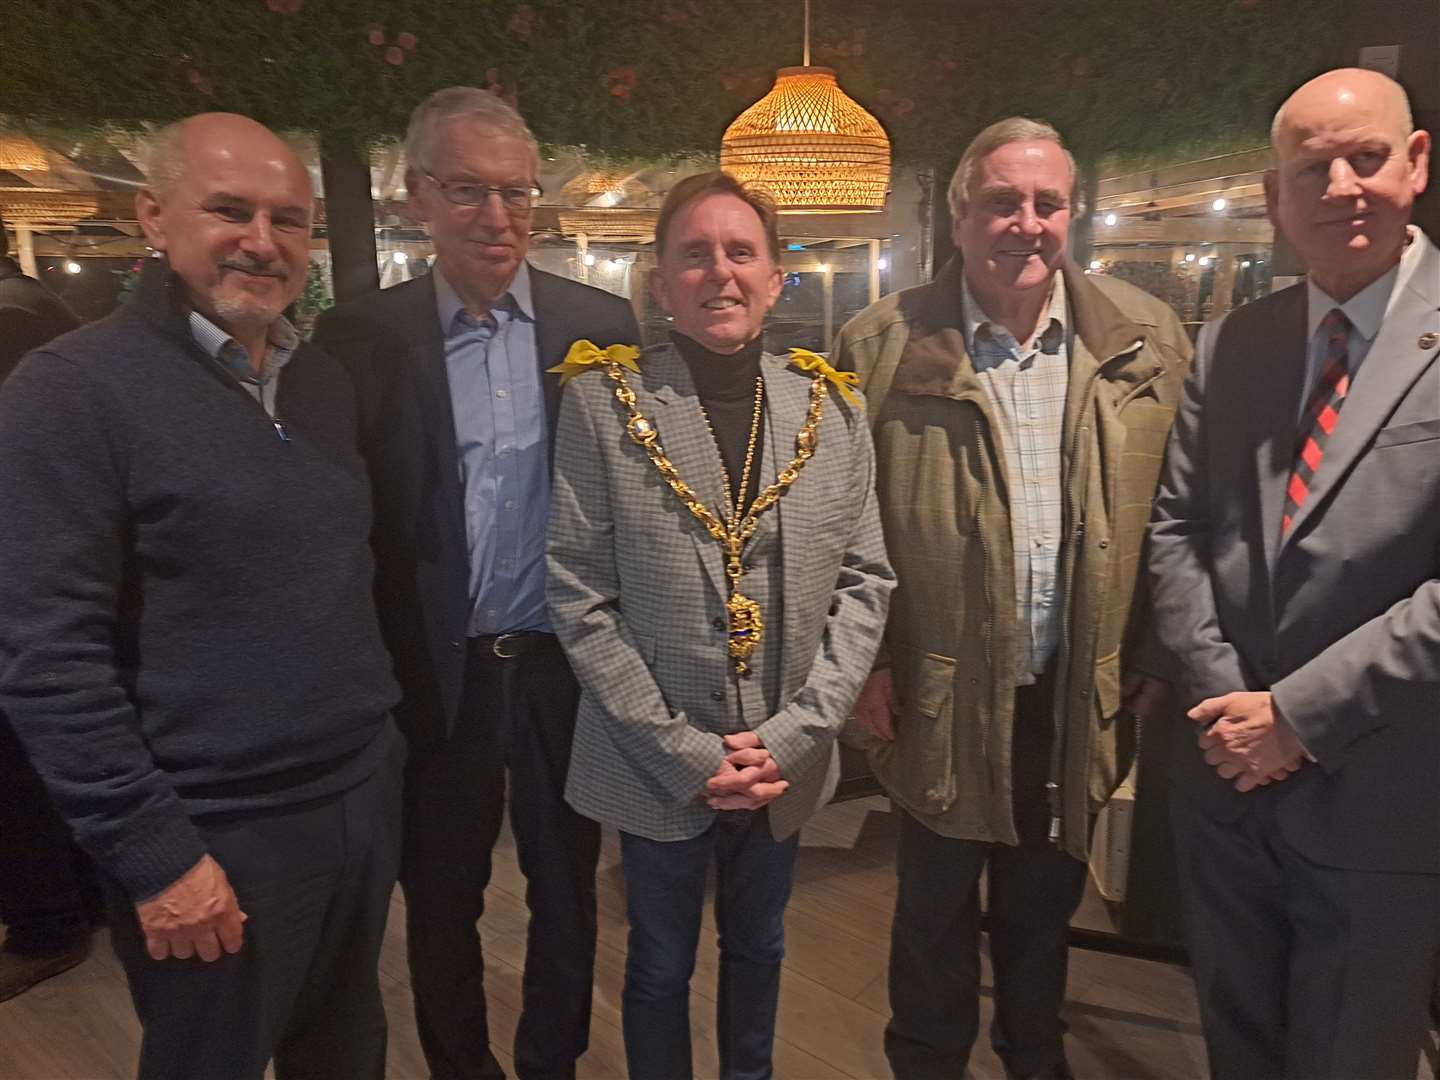 Some of this year's sponsors with the Mayor Derek Mortimer and Dave Naghi, from left, Michael Trigg and Robert Green of Gill Turner Tucker solicitors, and Clive Emson of Clive Emson auctioneers